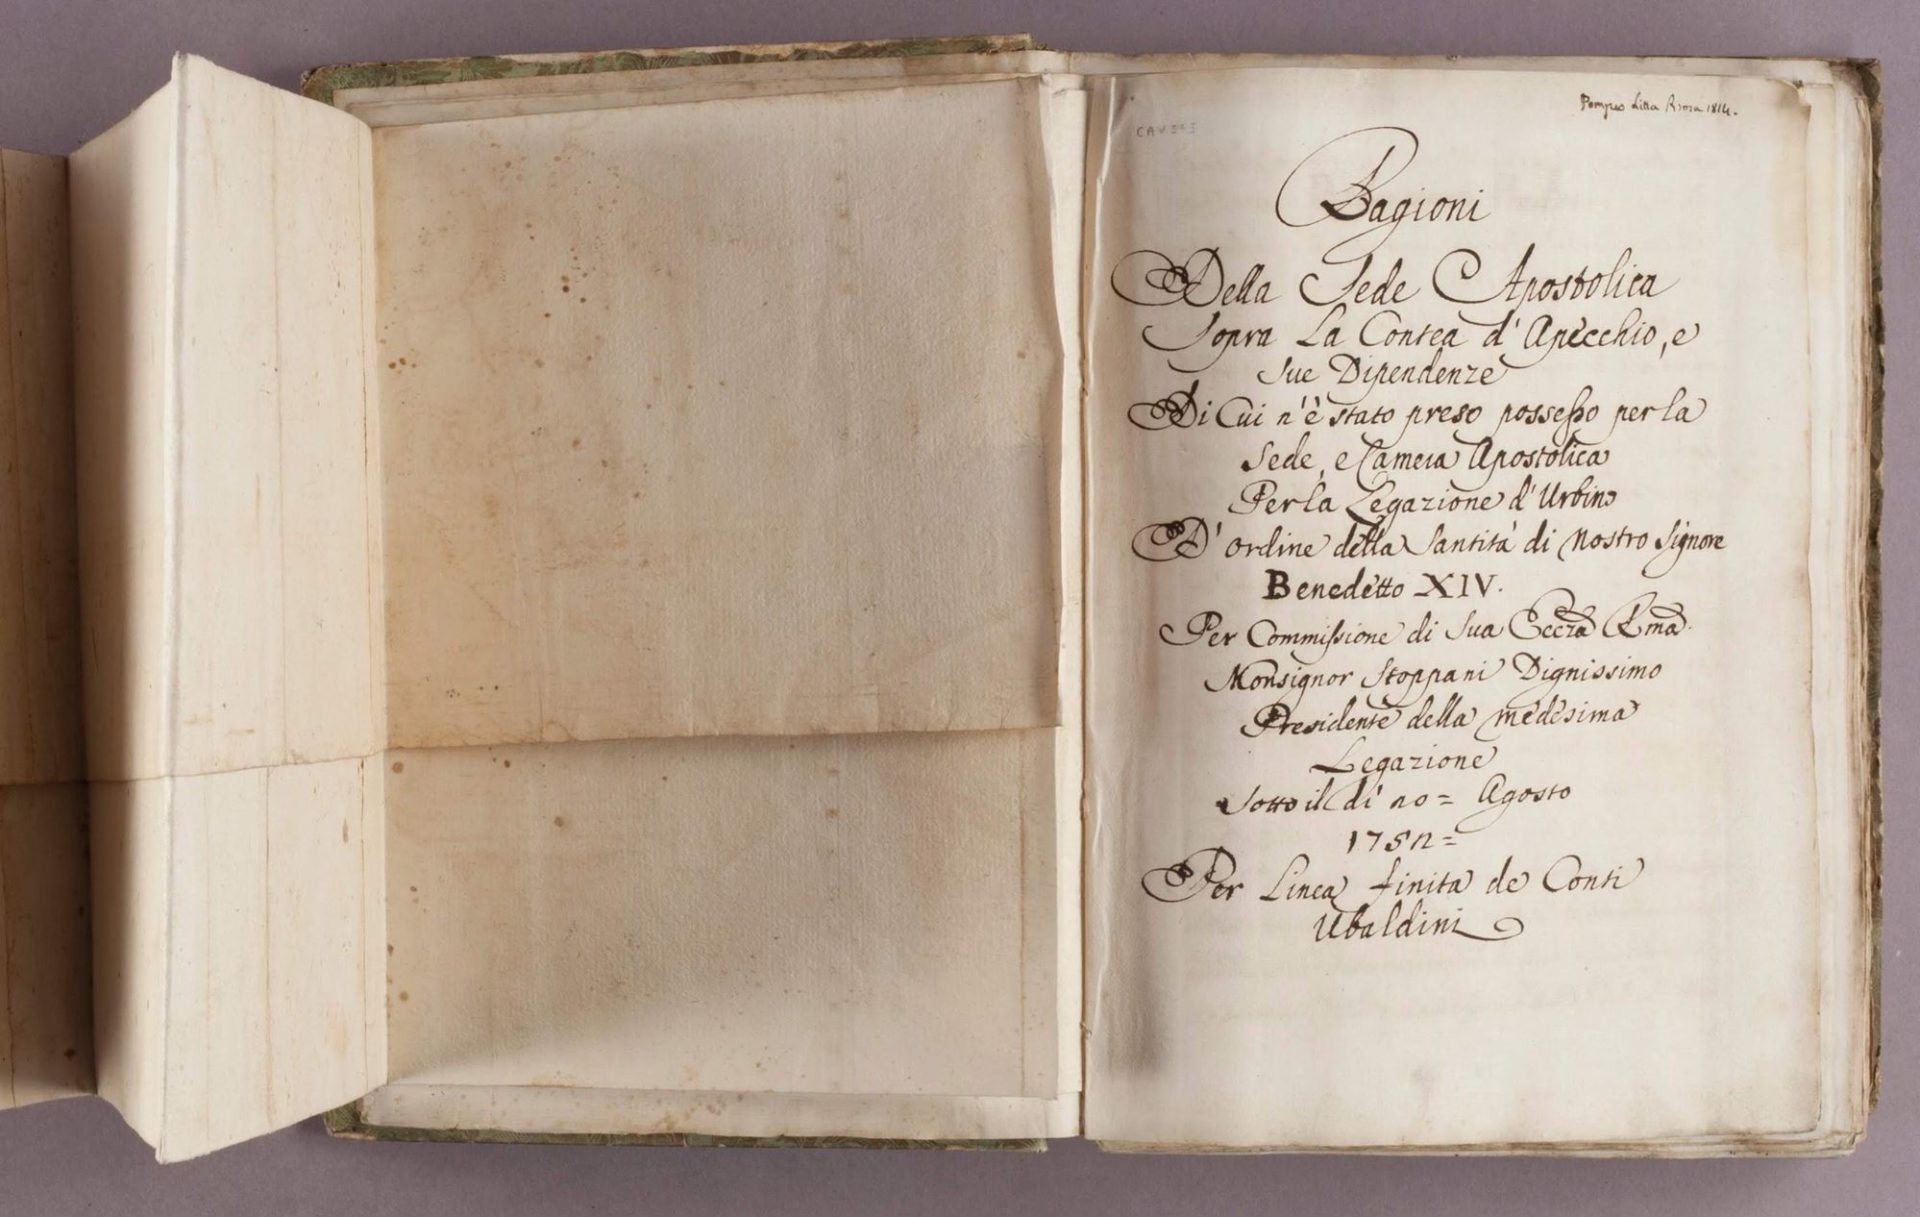 A manuscript book laid out with cursive writing on the pages